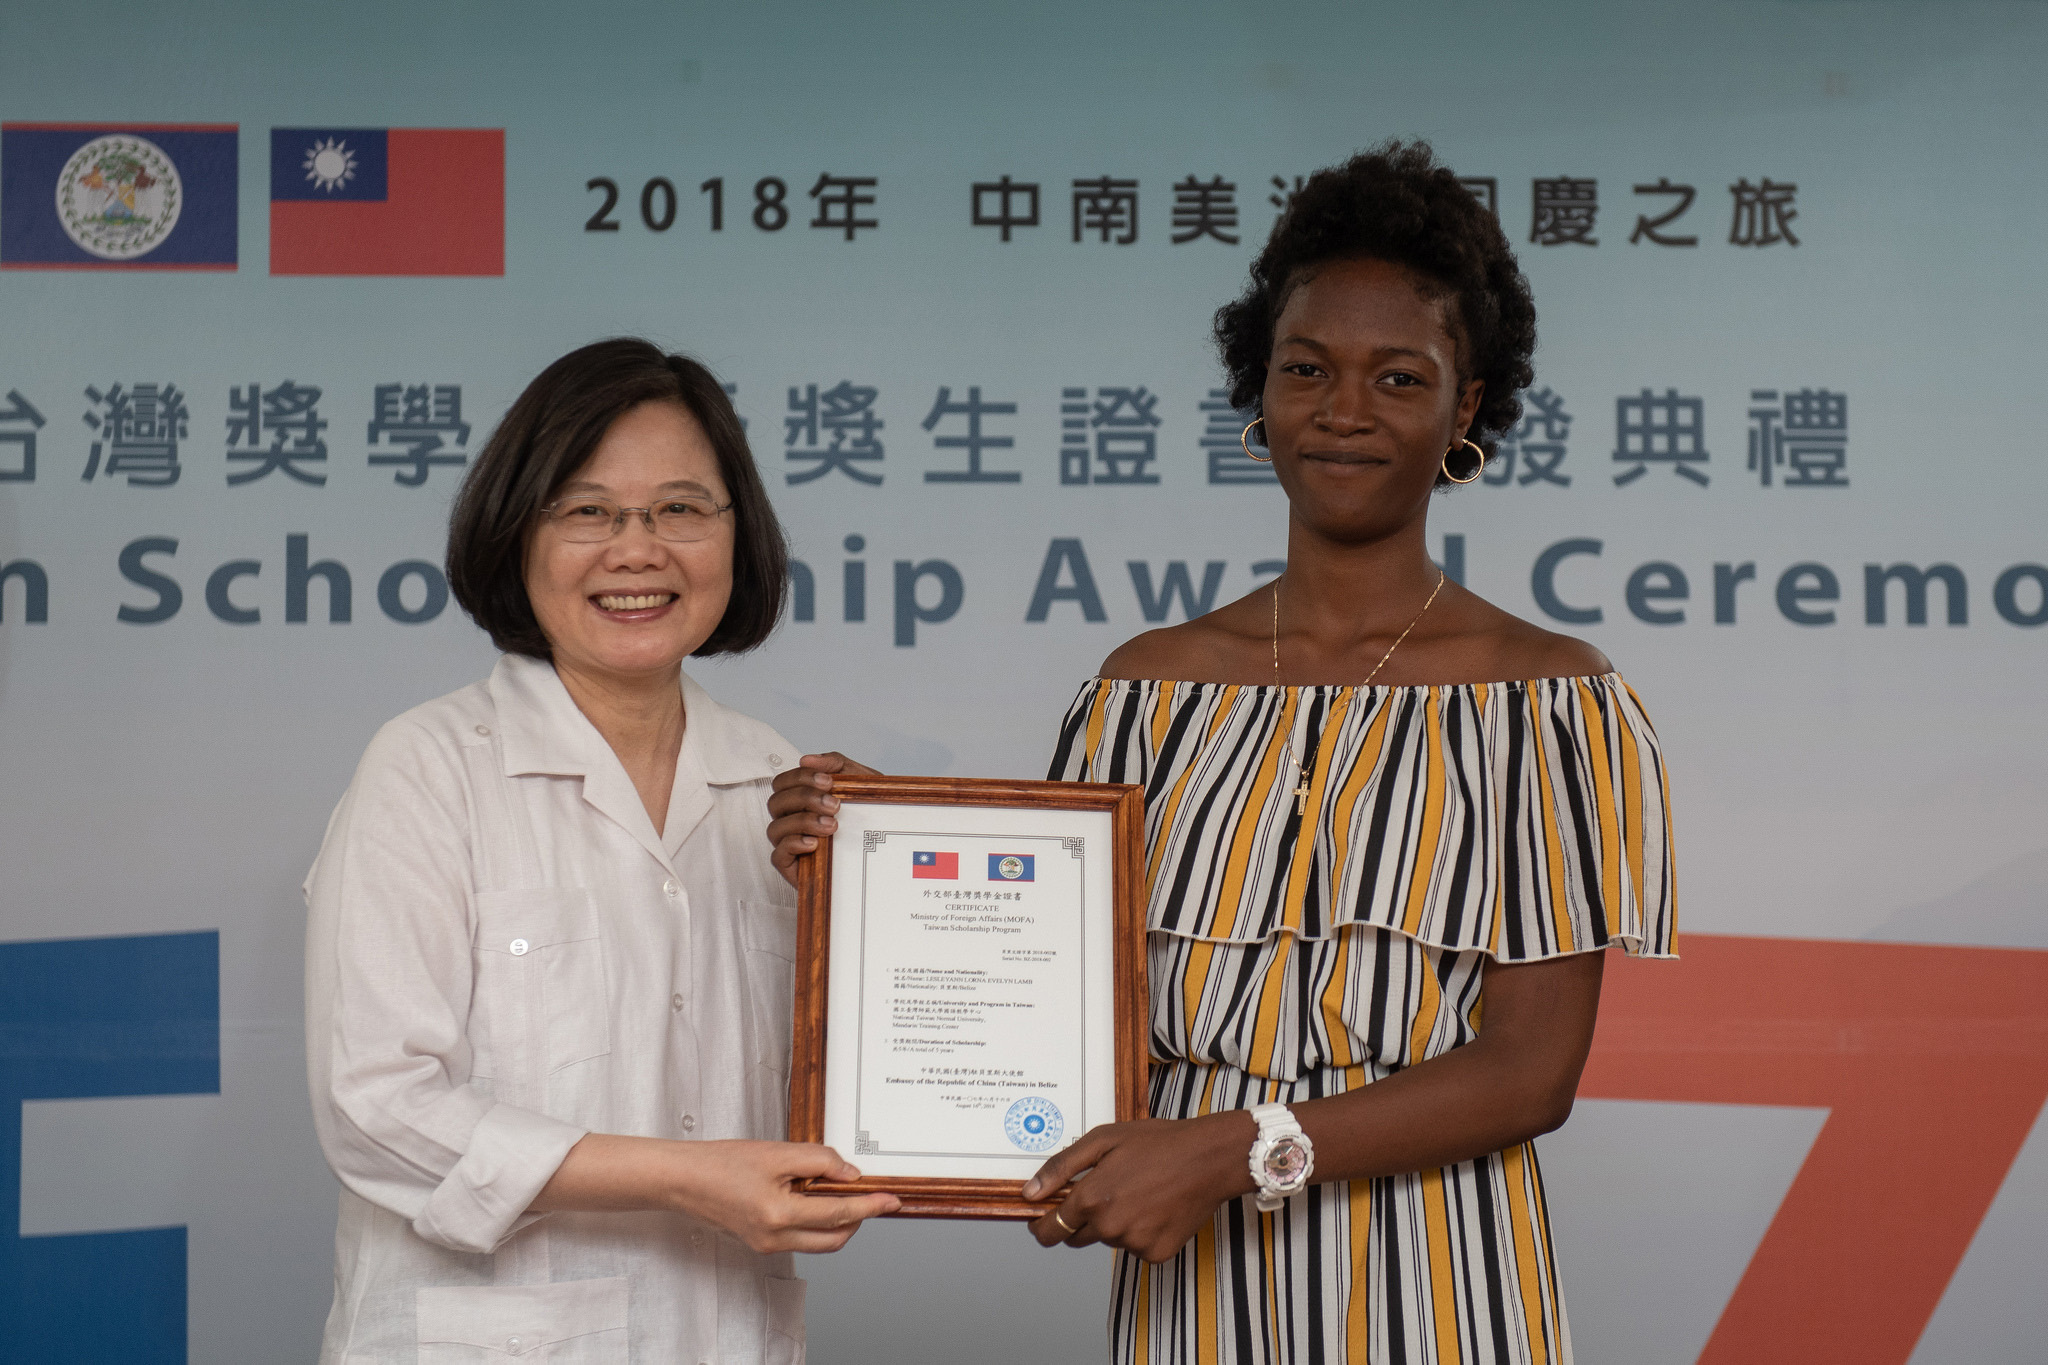 President Tsai presides over certificate award ceremony for Taiwan Scholarship recipients in Belize